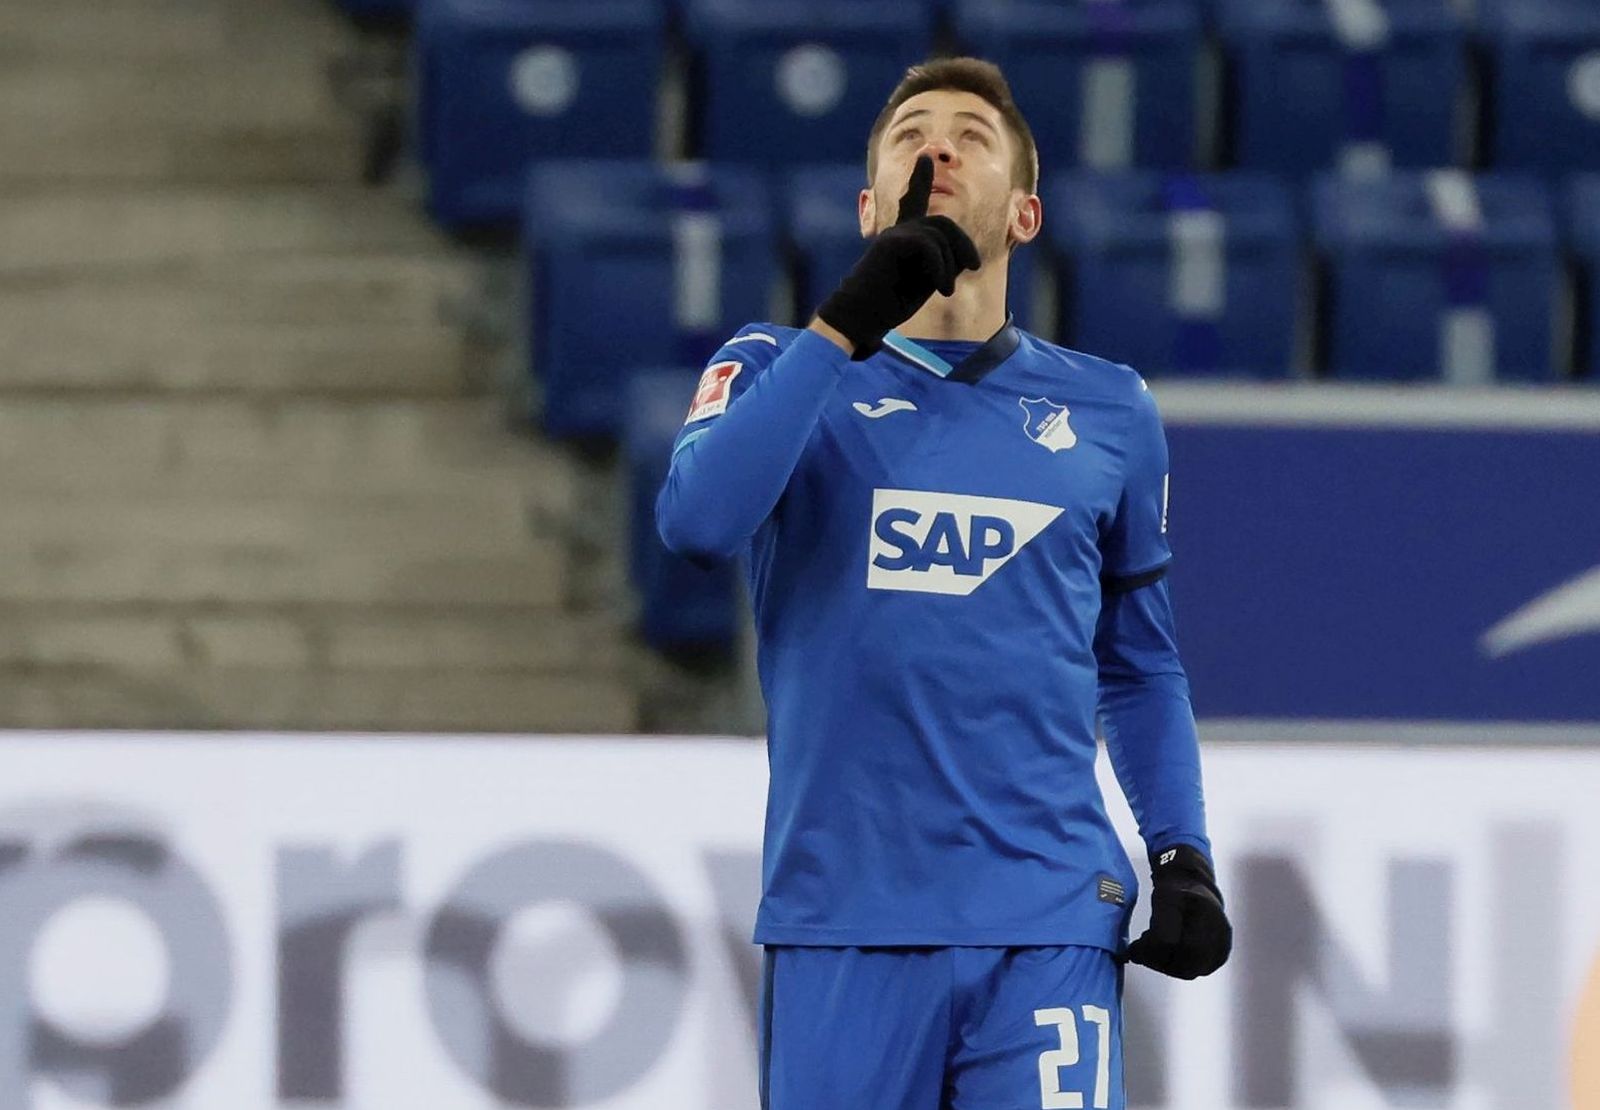 epa08962683 Hoffenheim's Andrej Kramaric celebrates scoring the first goal during the German Bundesliga soccer match between TSG 1899 Hoffenheim and 1. FC Cologne in Sinsheim, Germany, 24 January 2021.  EPA/RONALD WITTEK CONDITIONS - ATTENTION: The DFL regulations prohibit any use of photographs as image sequences and/or quasi-video.